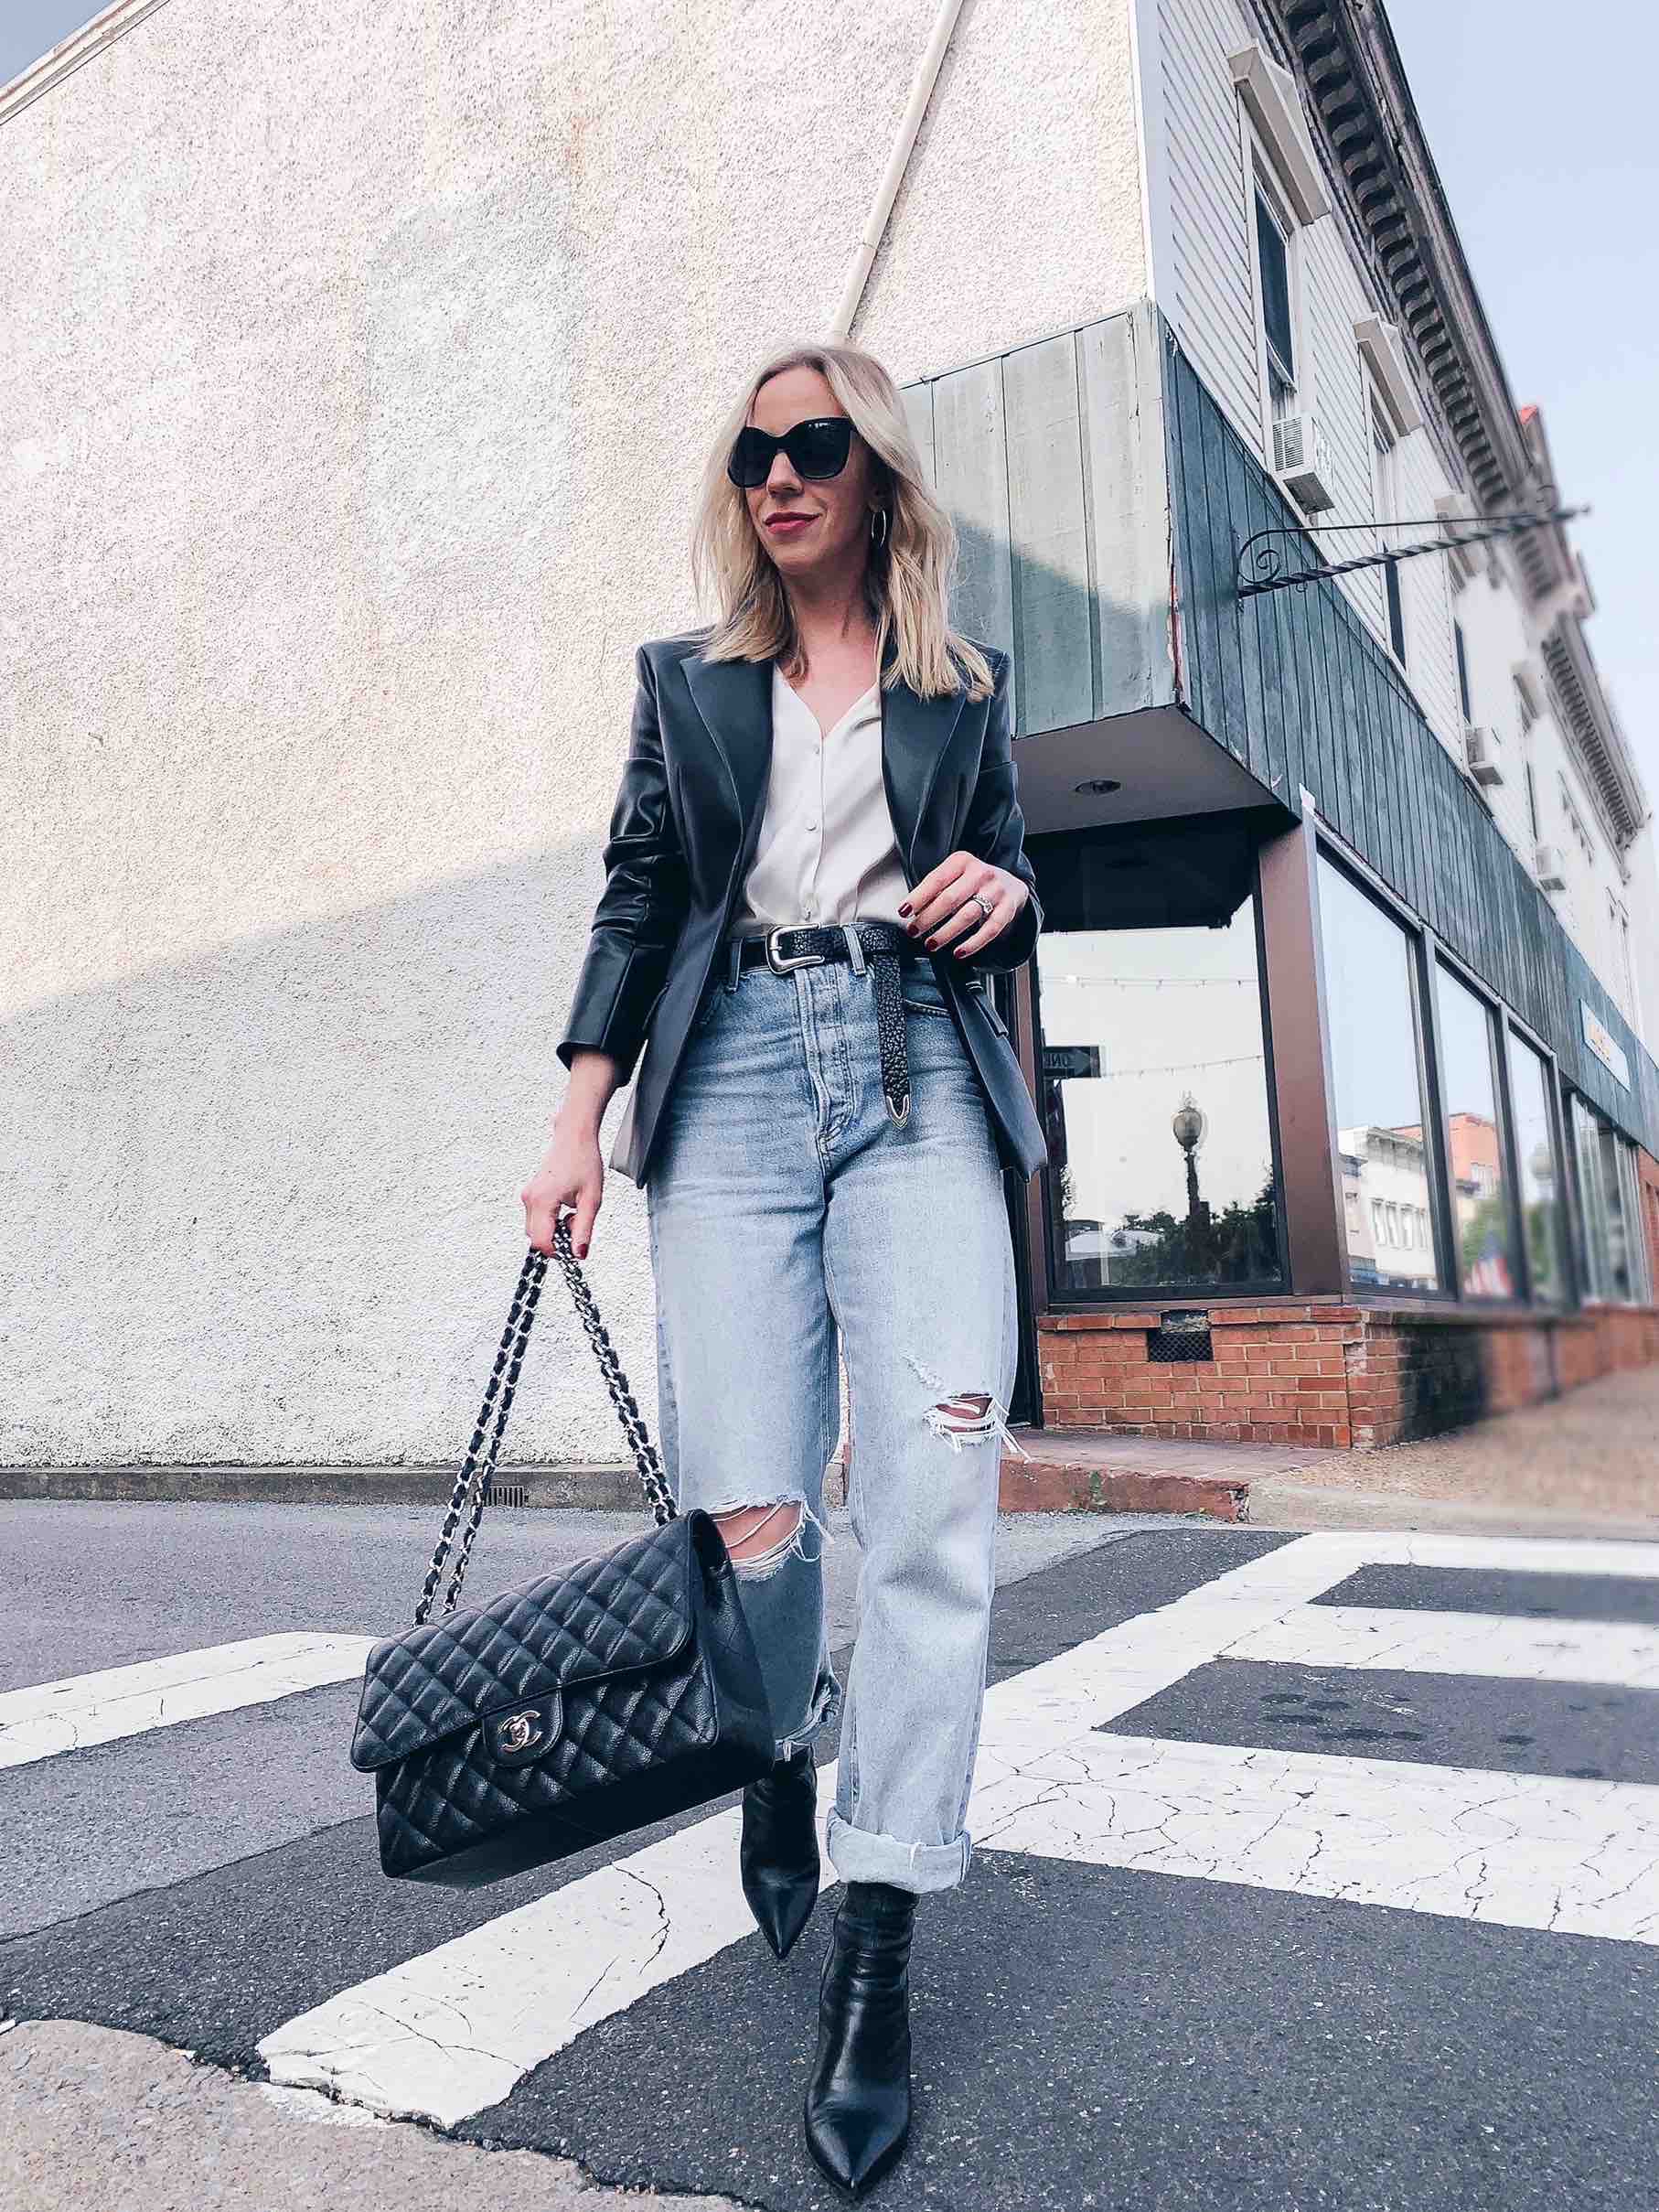 28 Boots to Wear With Jeans—According to Fashion People